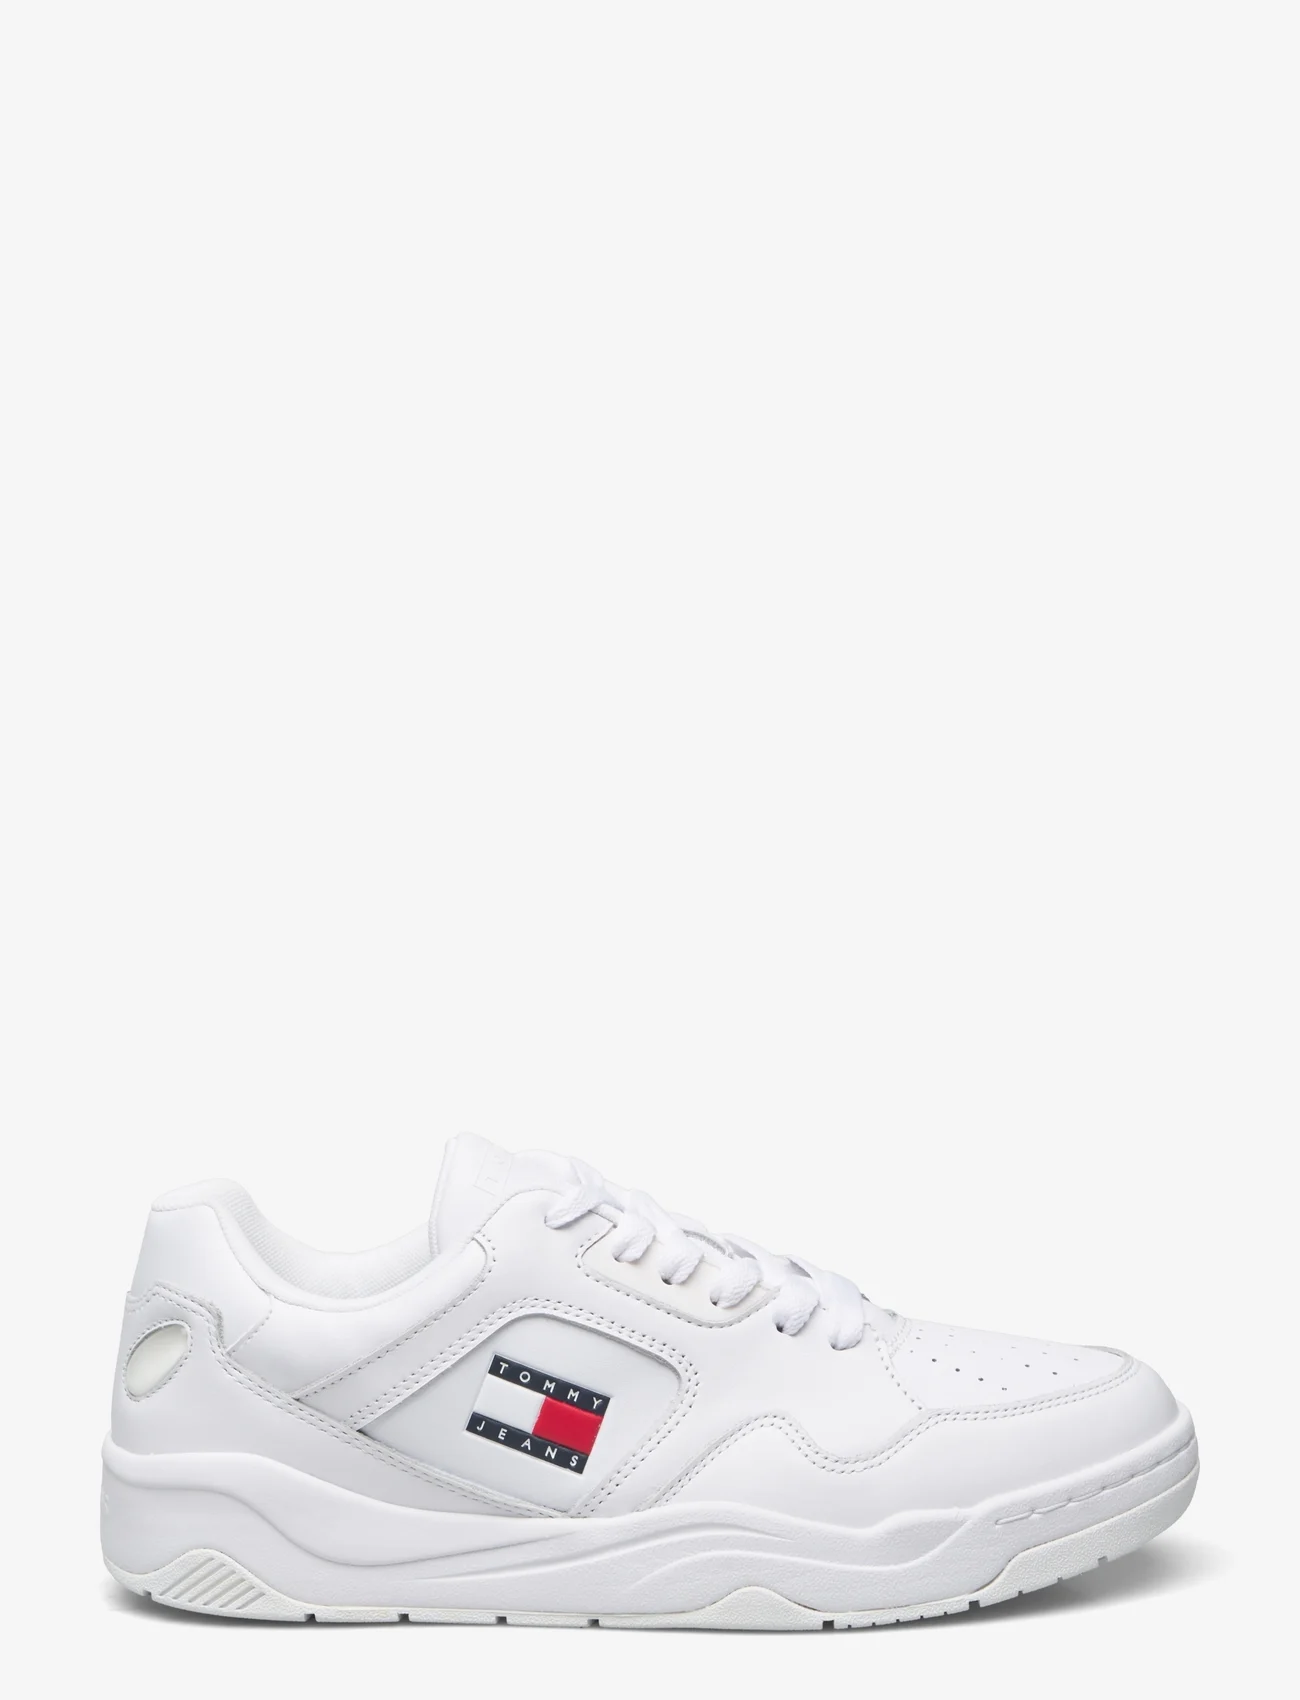 Tommy Hilfiger - TJM LEATHER OUTSOLE COLOR - niedriger schnitt - white - 1